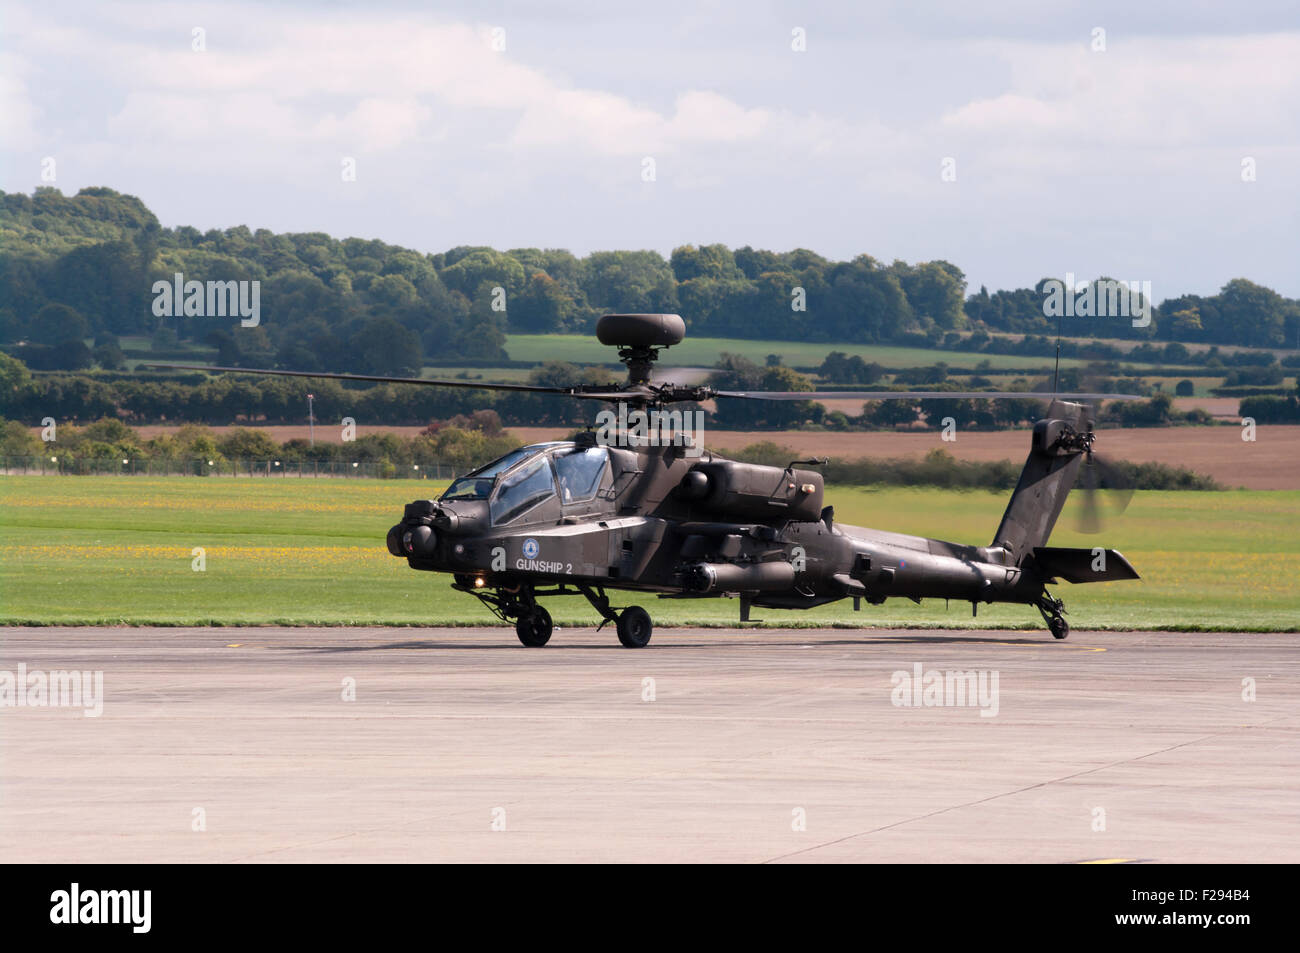 Side view Of A British Army AH MK1 Apache Longbow Helicopter Taxiing On Runway Stock Photo